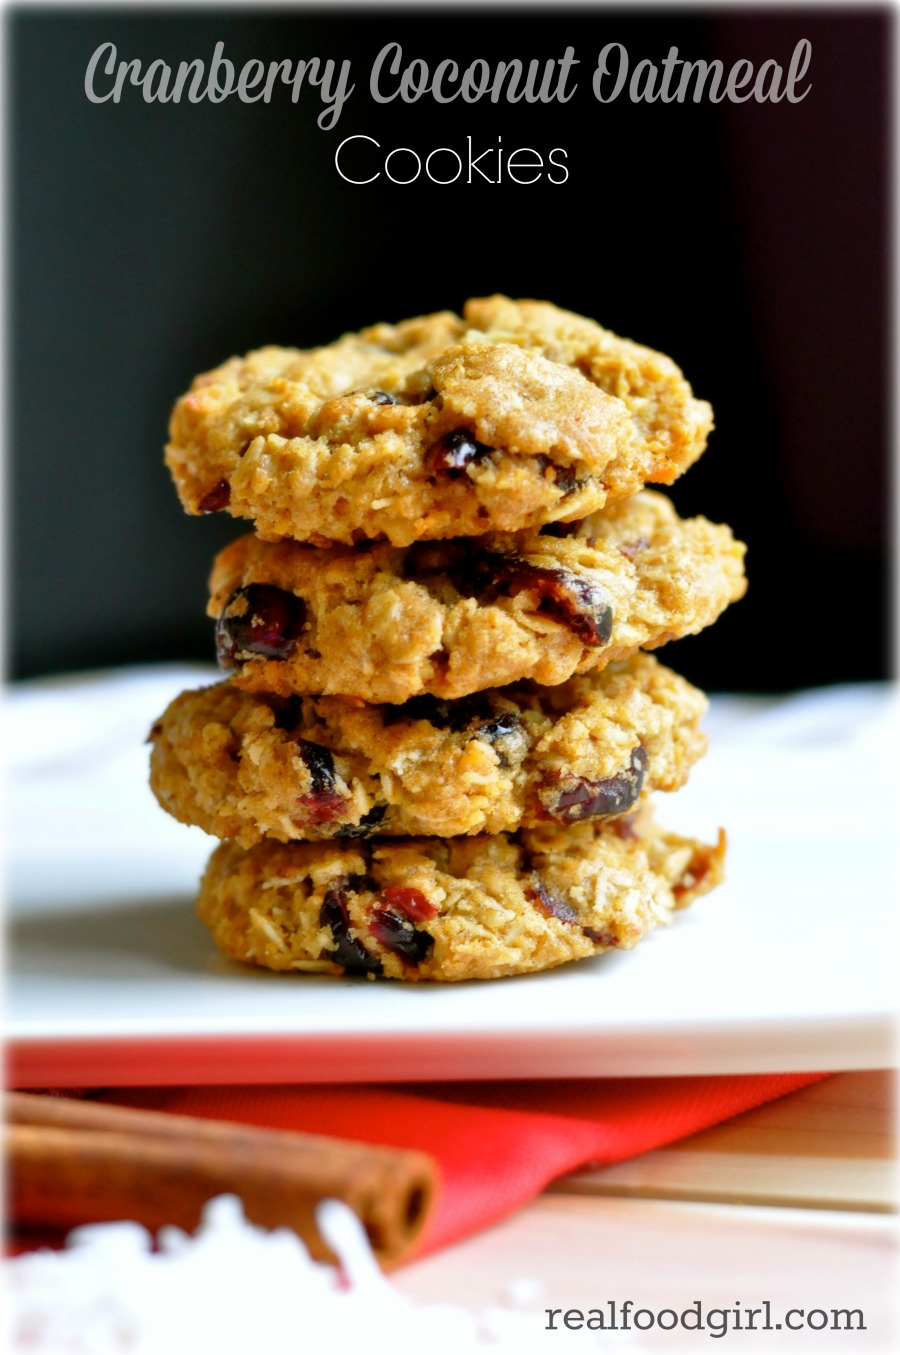 Cranberry-Coconut Oatmeal Cookies | Real Food Girl